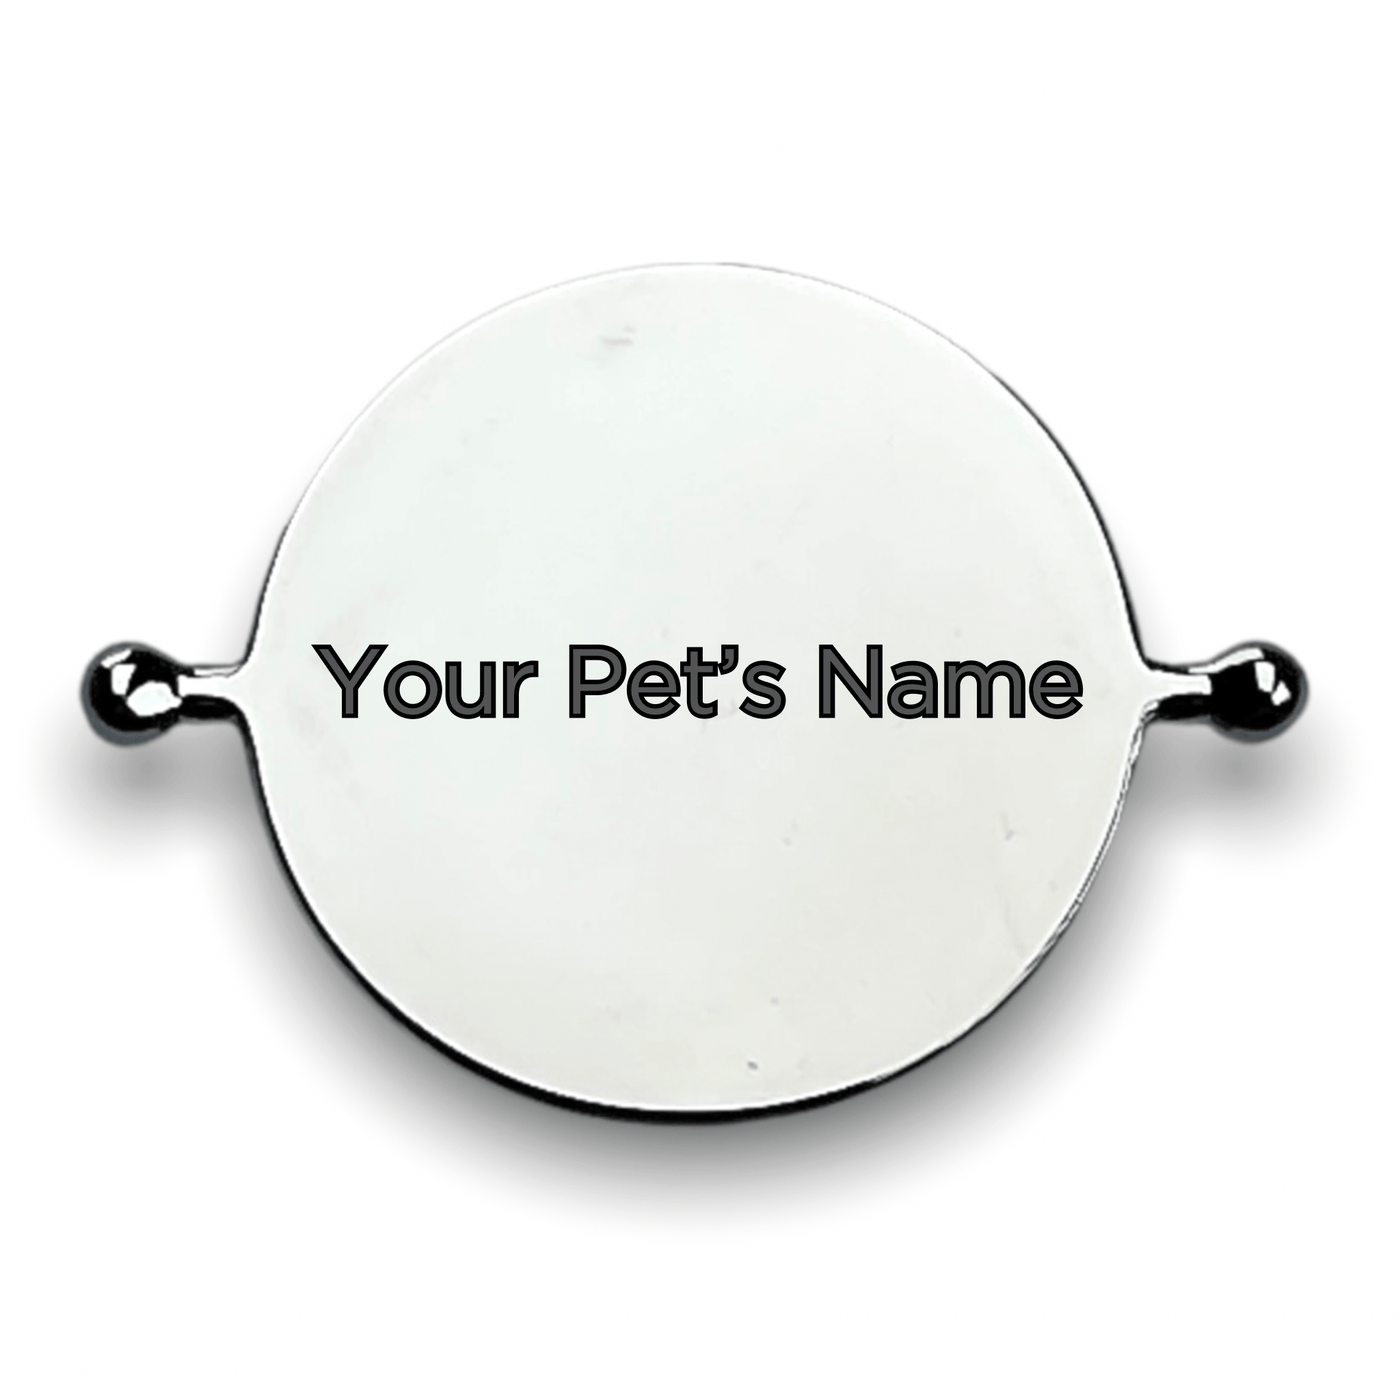 Your Pet's Name Engraved on an Element (custom pre-order)